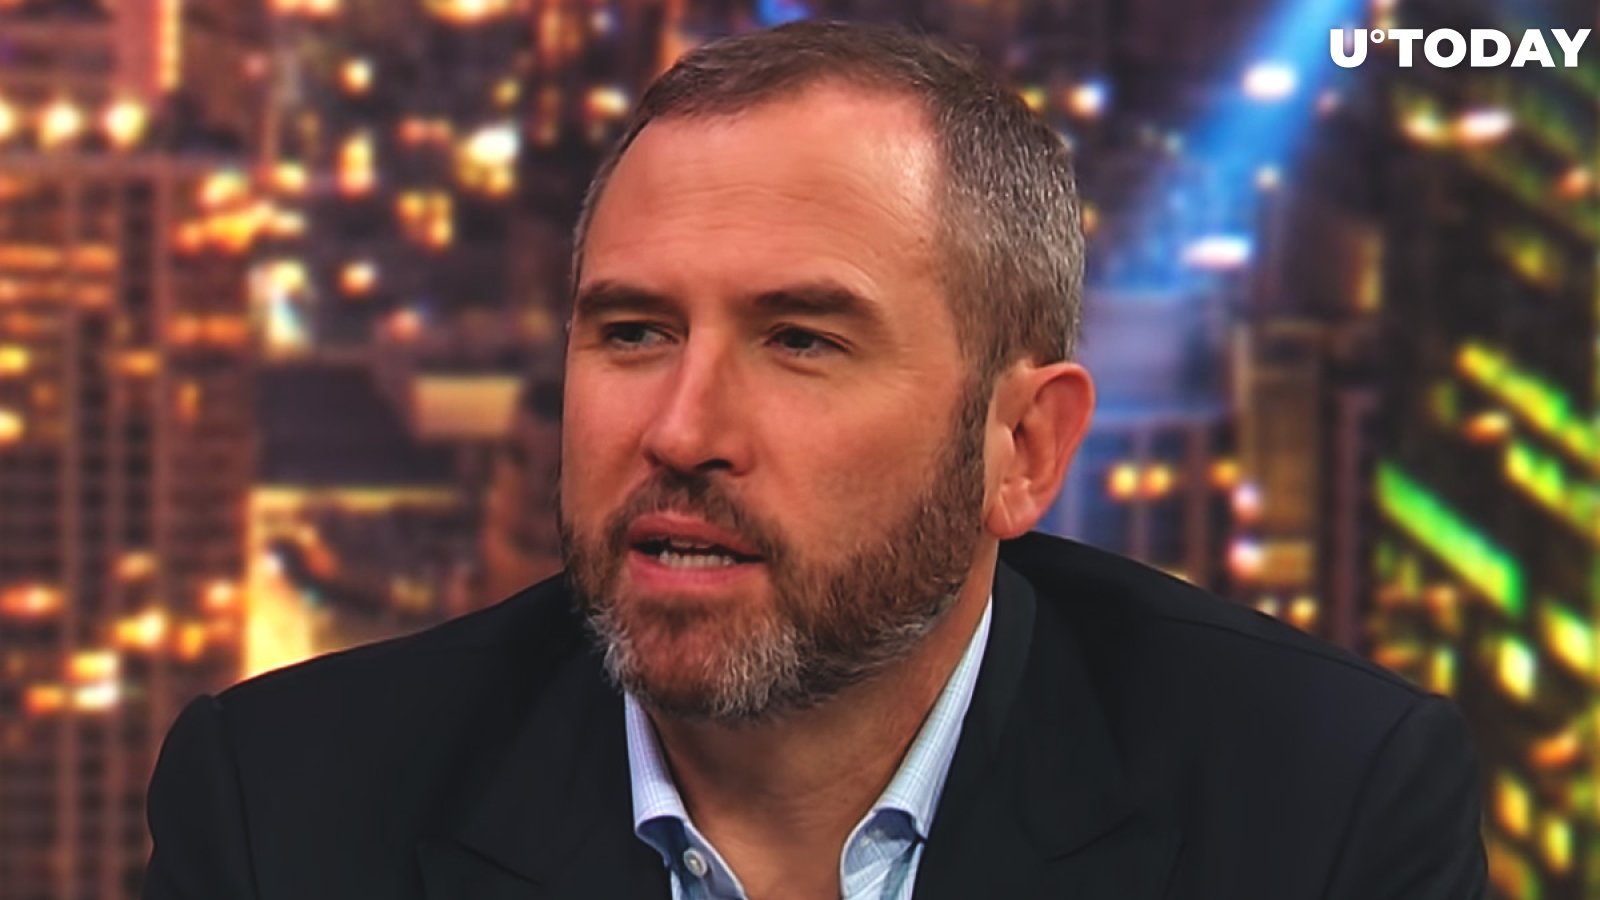 Ripple CEO on SEC Fight: You Have to Stand Up to Bully